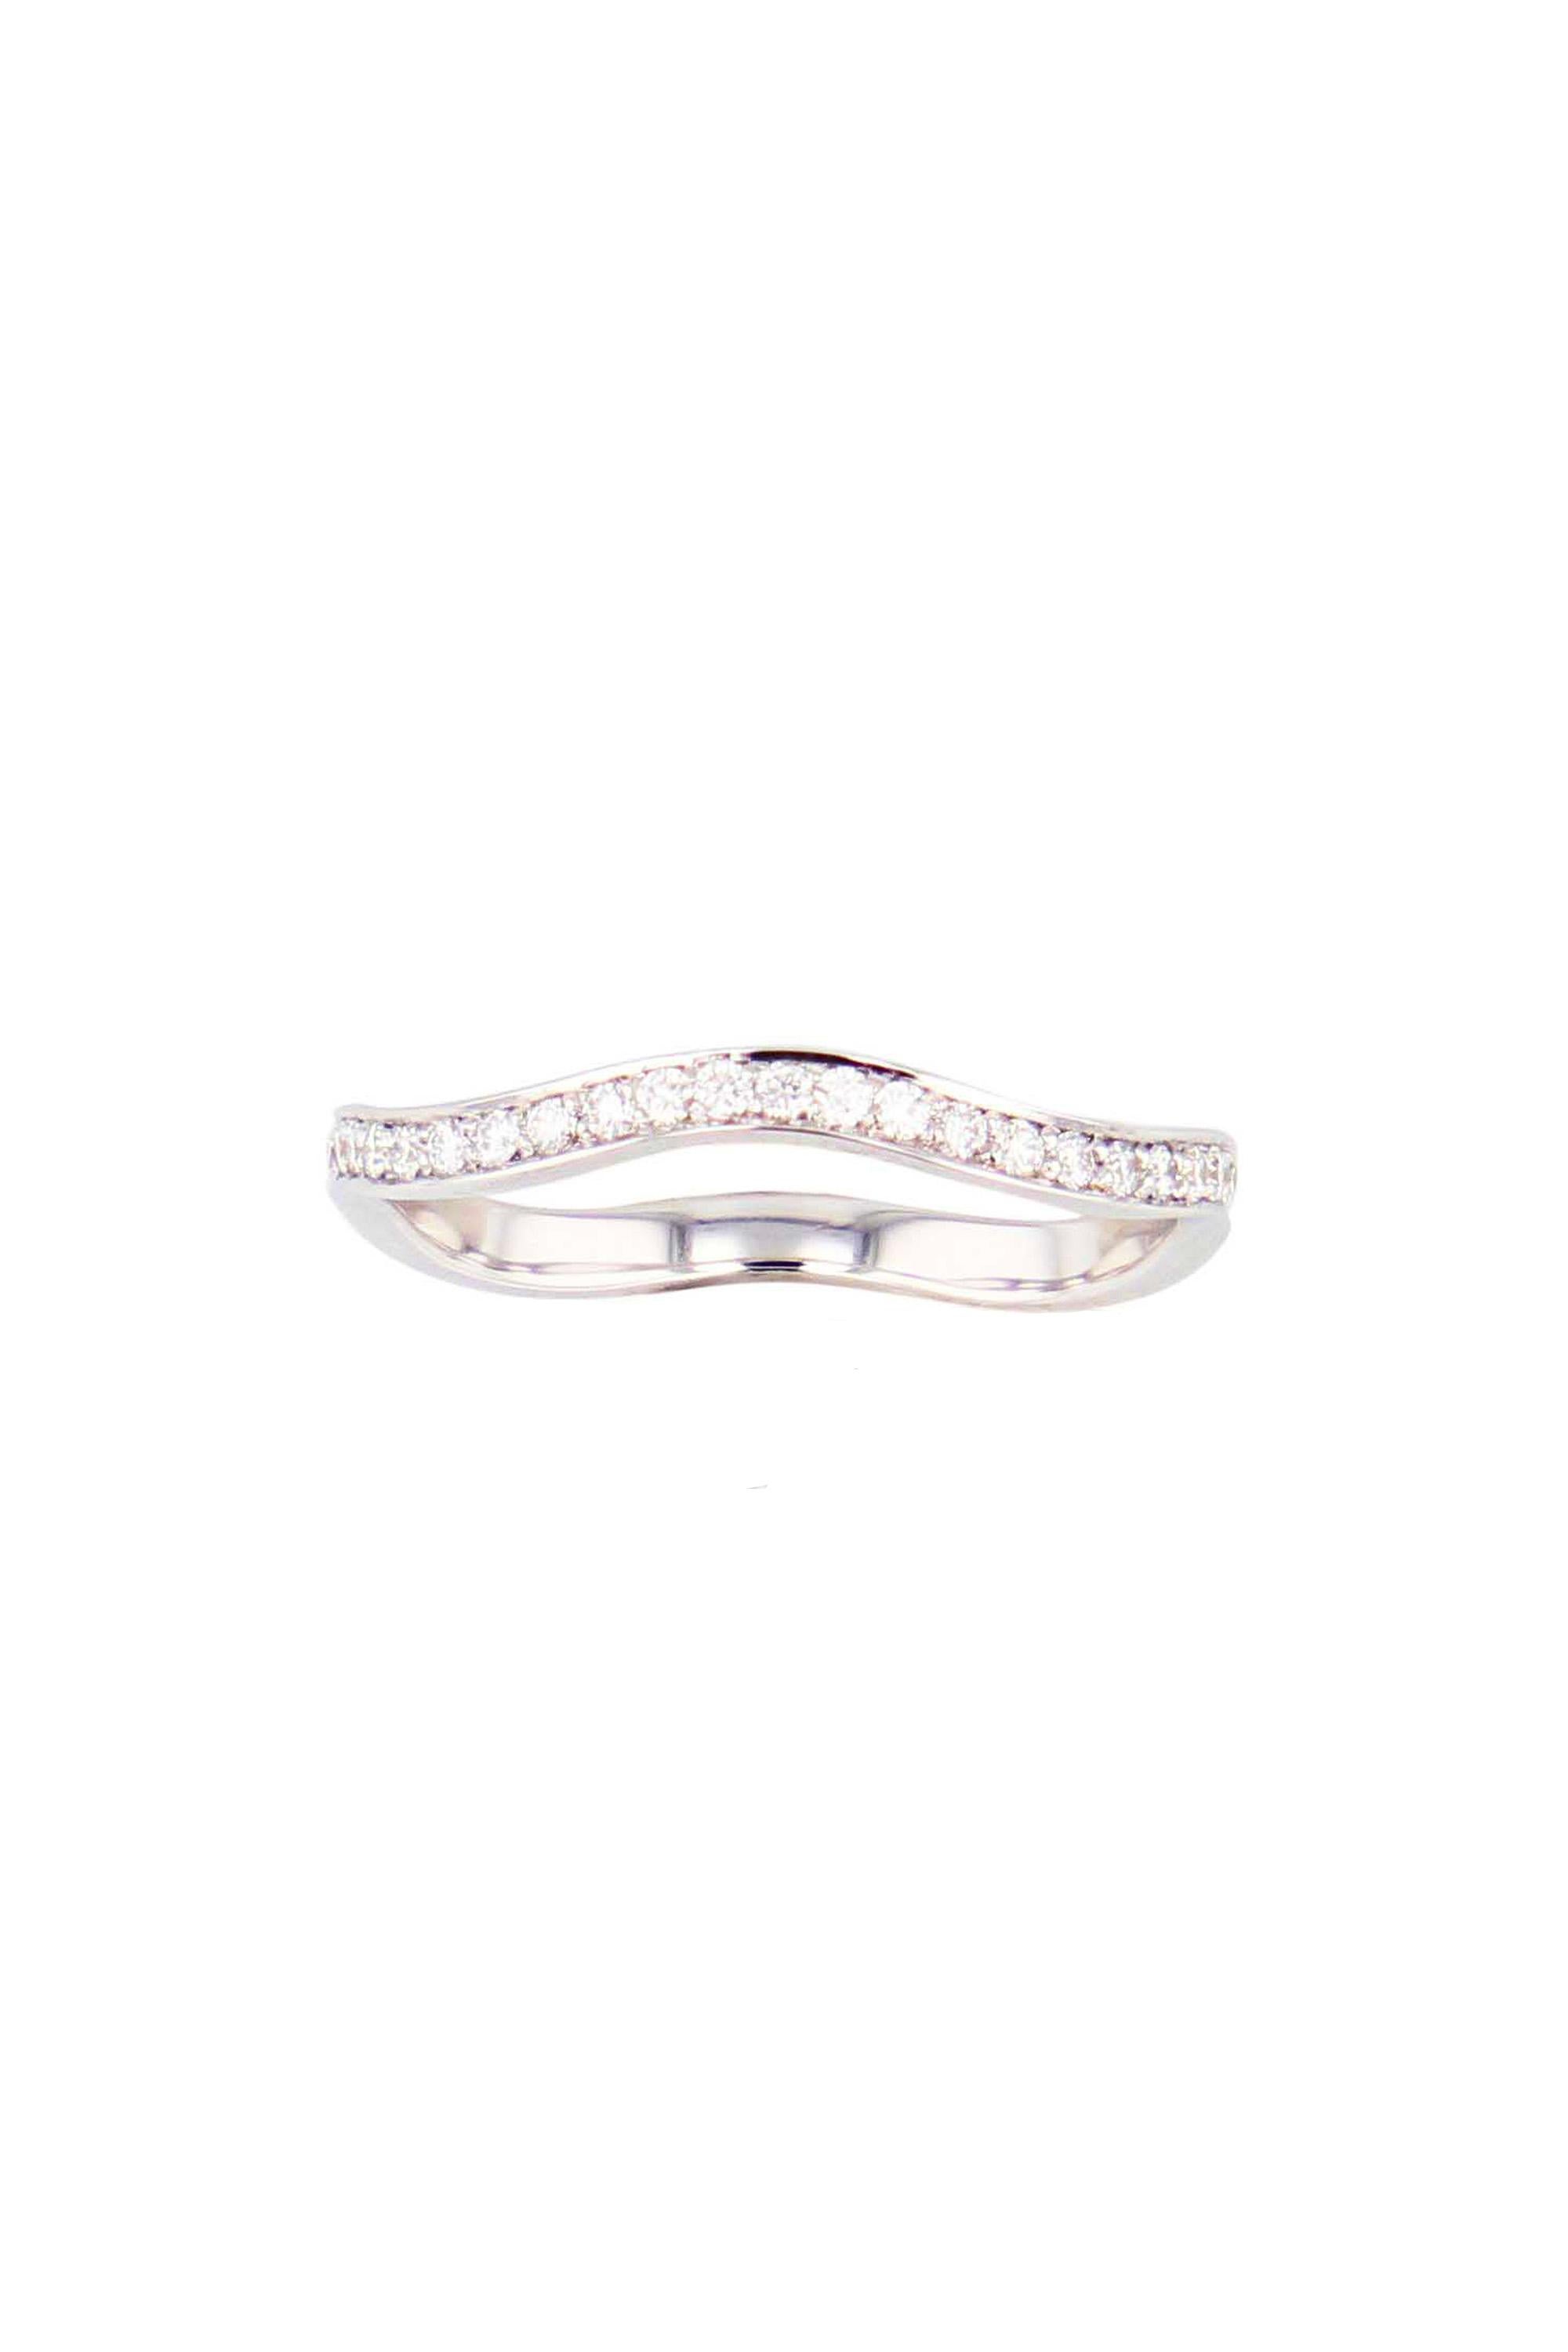 Curved wedding ring in white gold and set with diamonds. 

Can be paired or stacked with other rings from the same collection.

Details:
45 Diamonds: 0.33 cts
18k White Gold: 2 g
Made in France